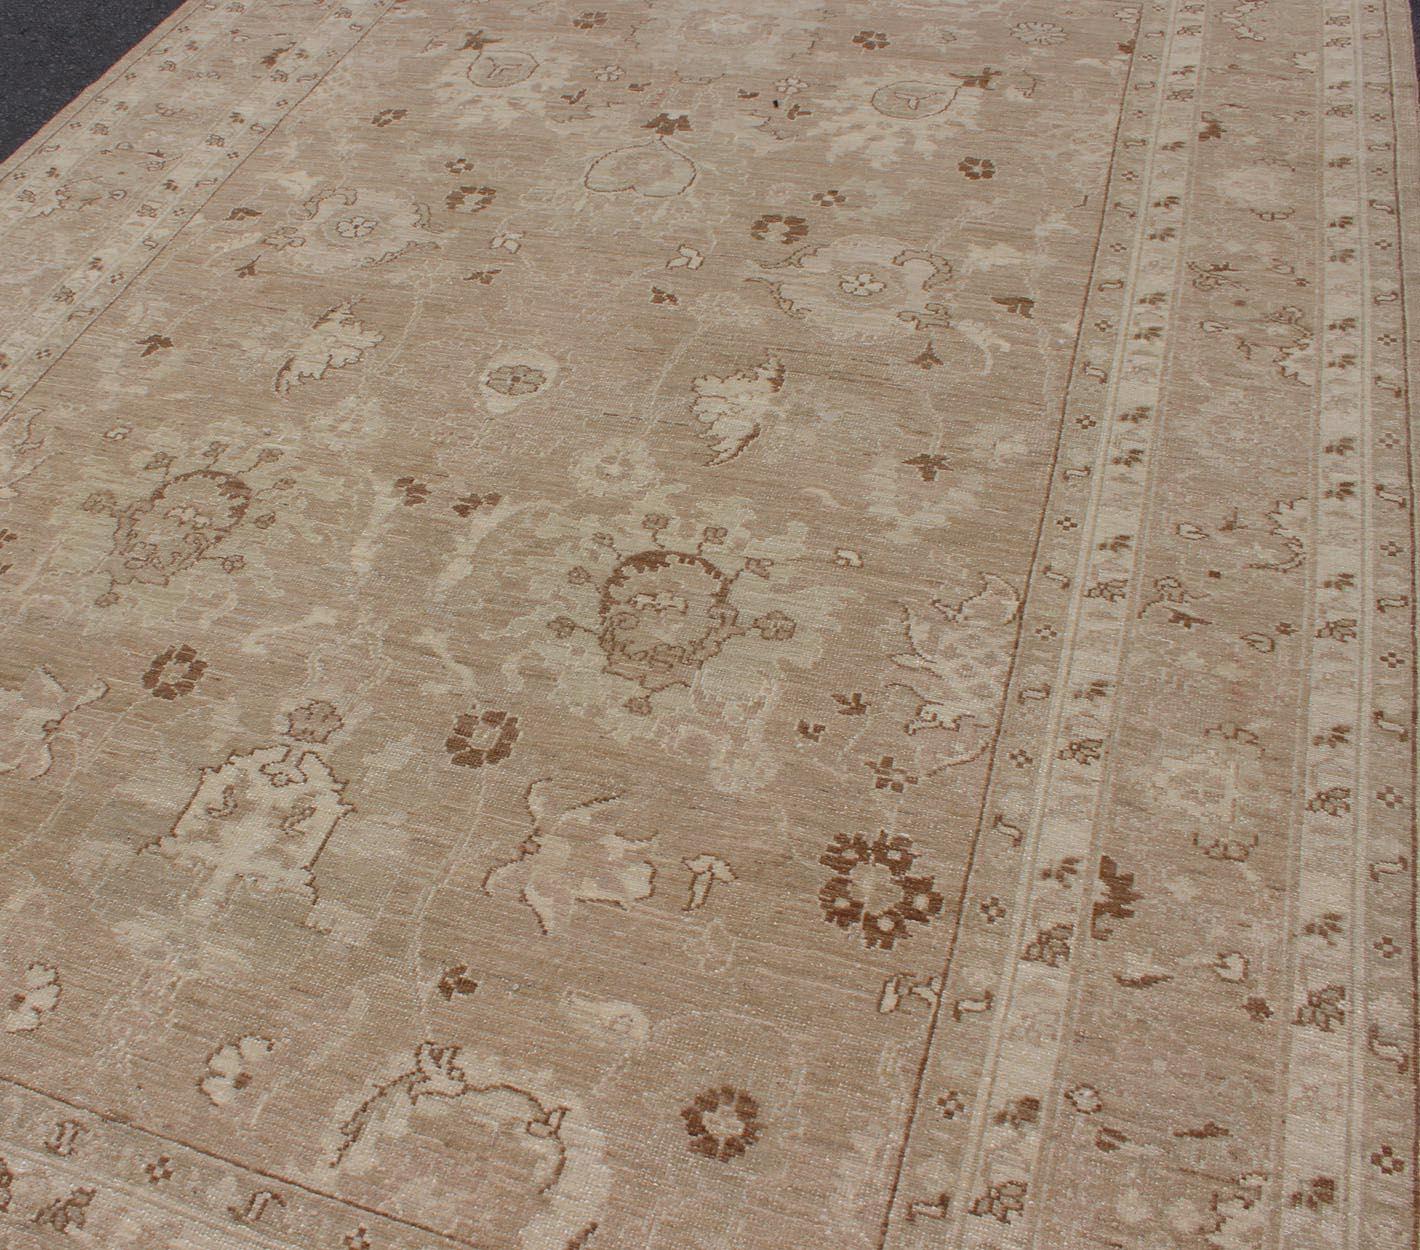 Vintage Afghan Rug in Muted Earthy Tones of Light Brown, Caramel, Light Green For Sale 2